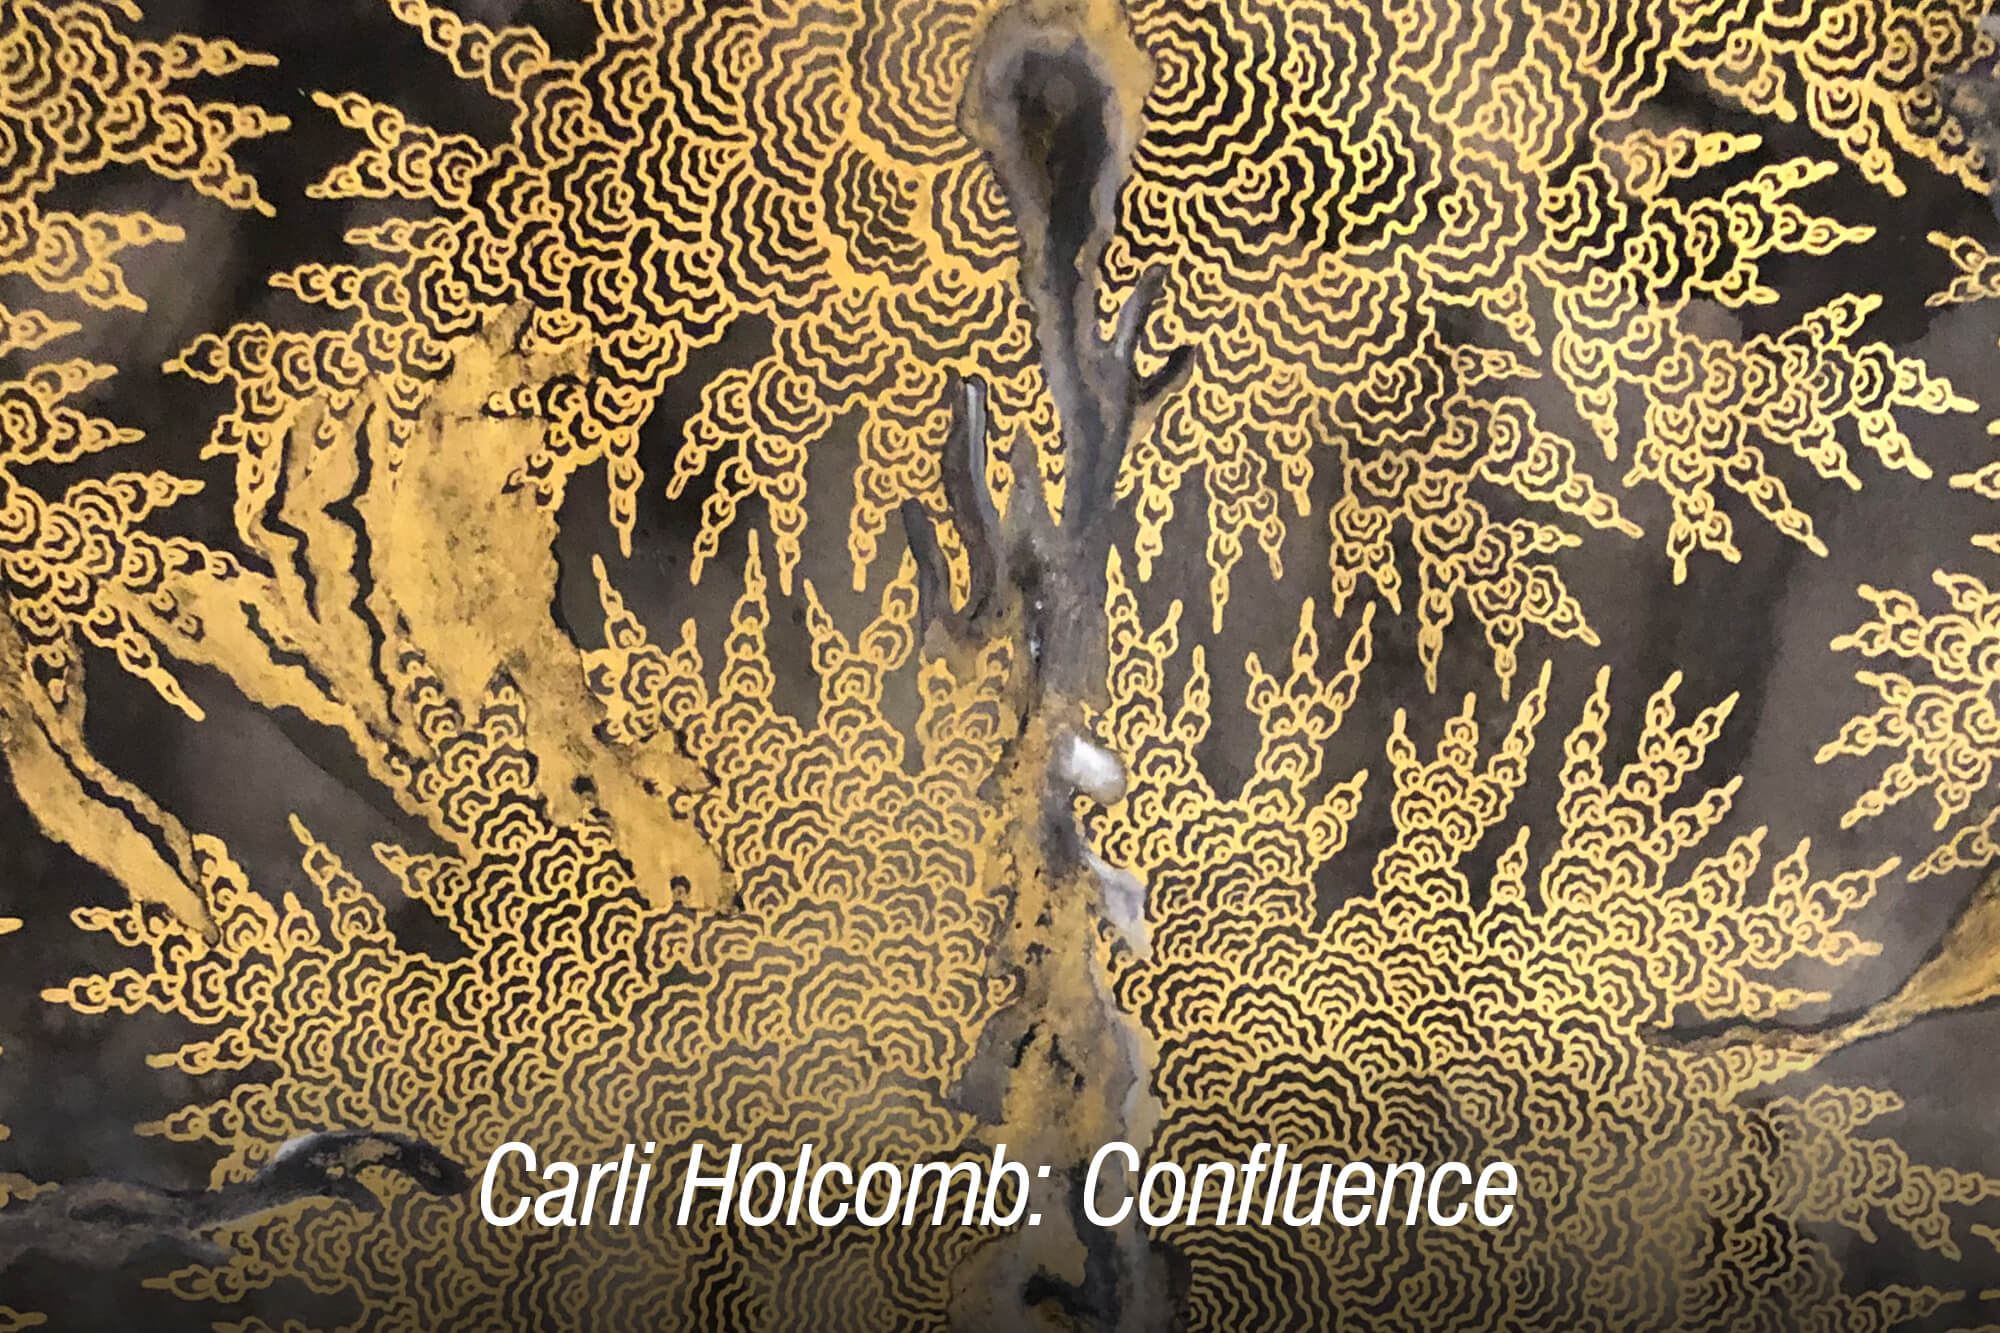 Image of metal artwork with the words "Carli Holcomb: Confluence."